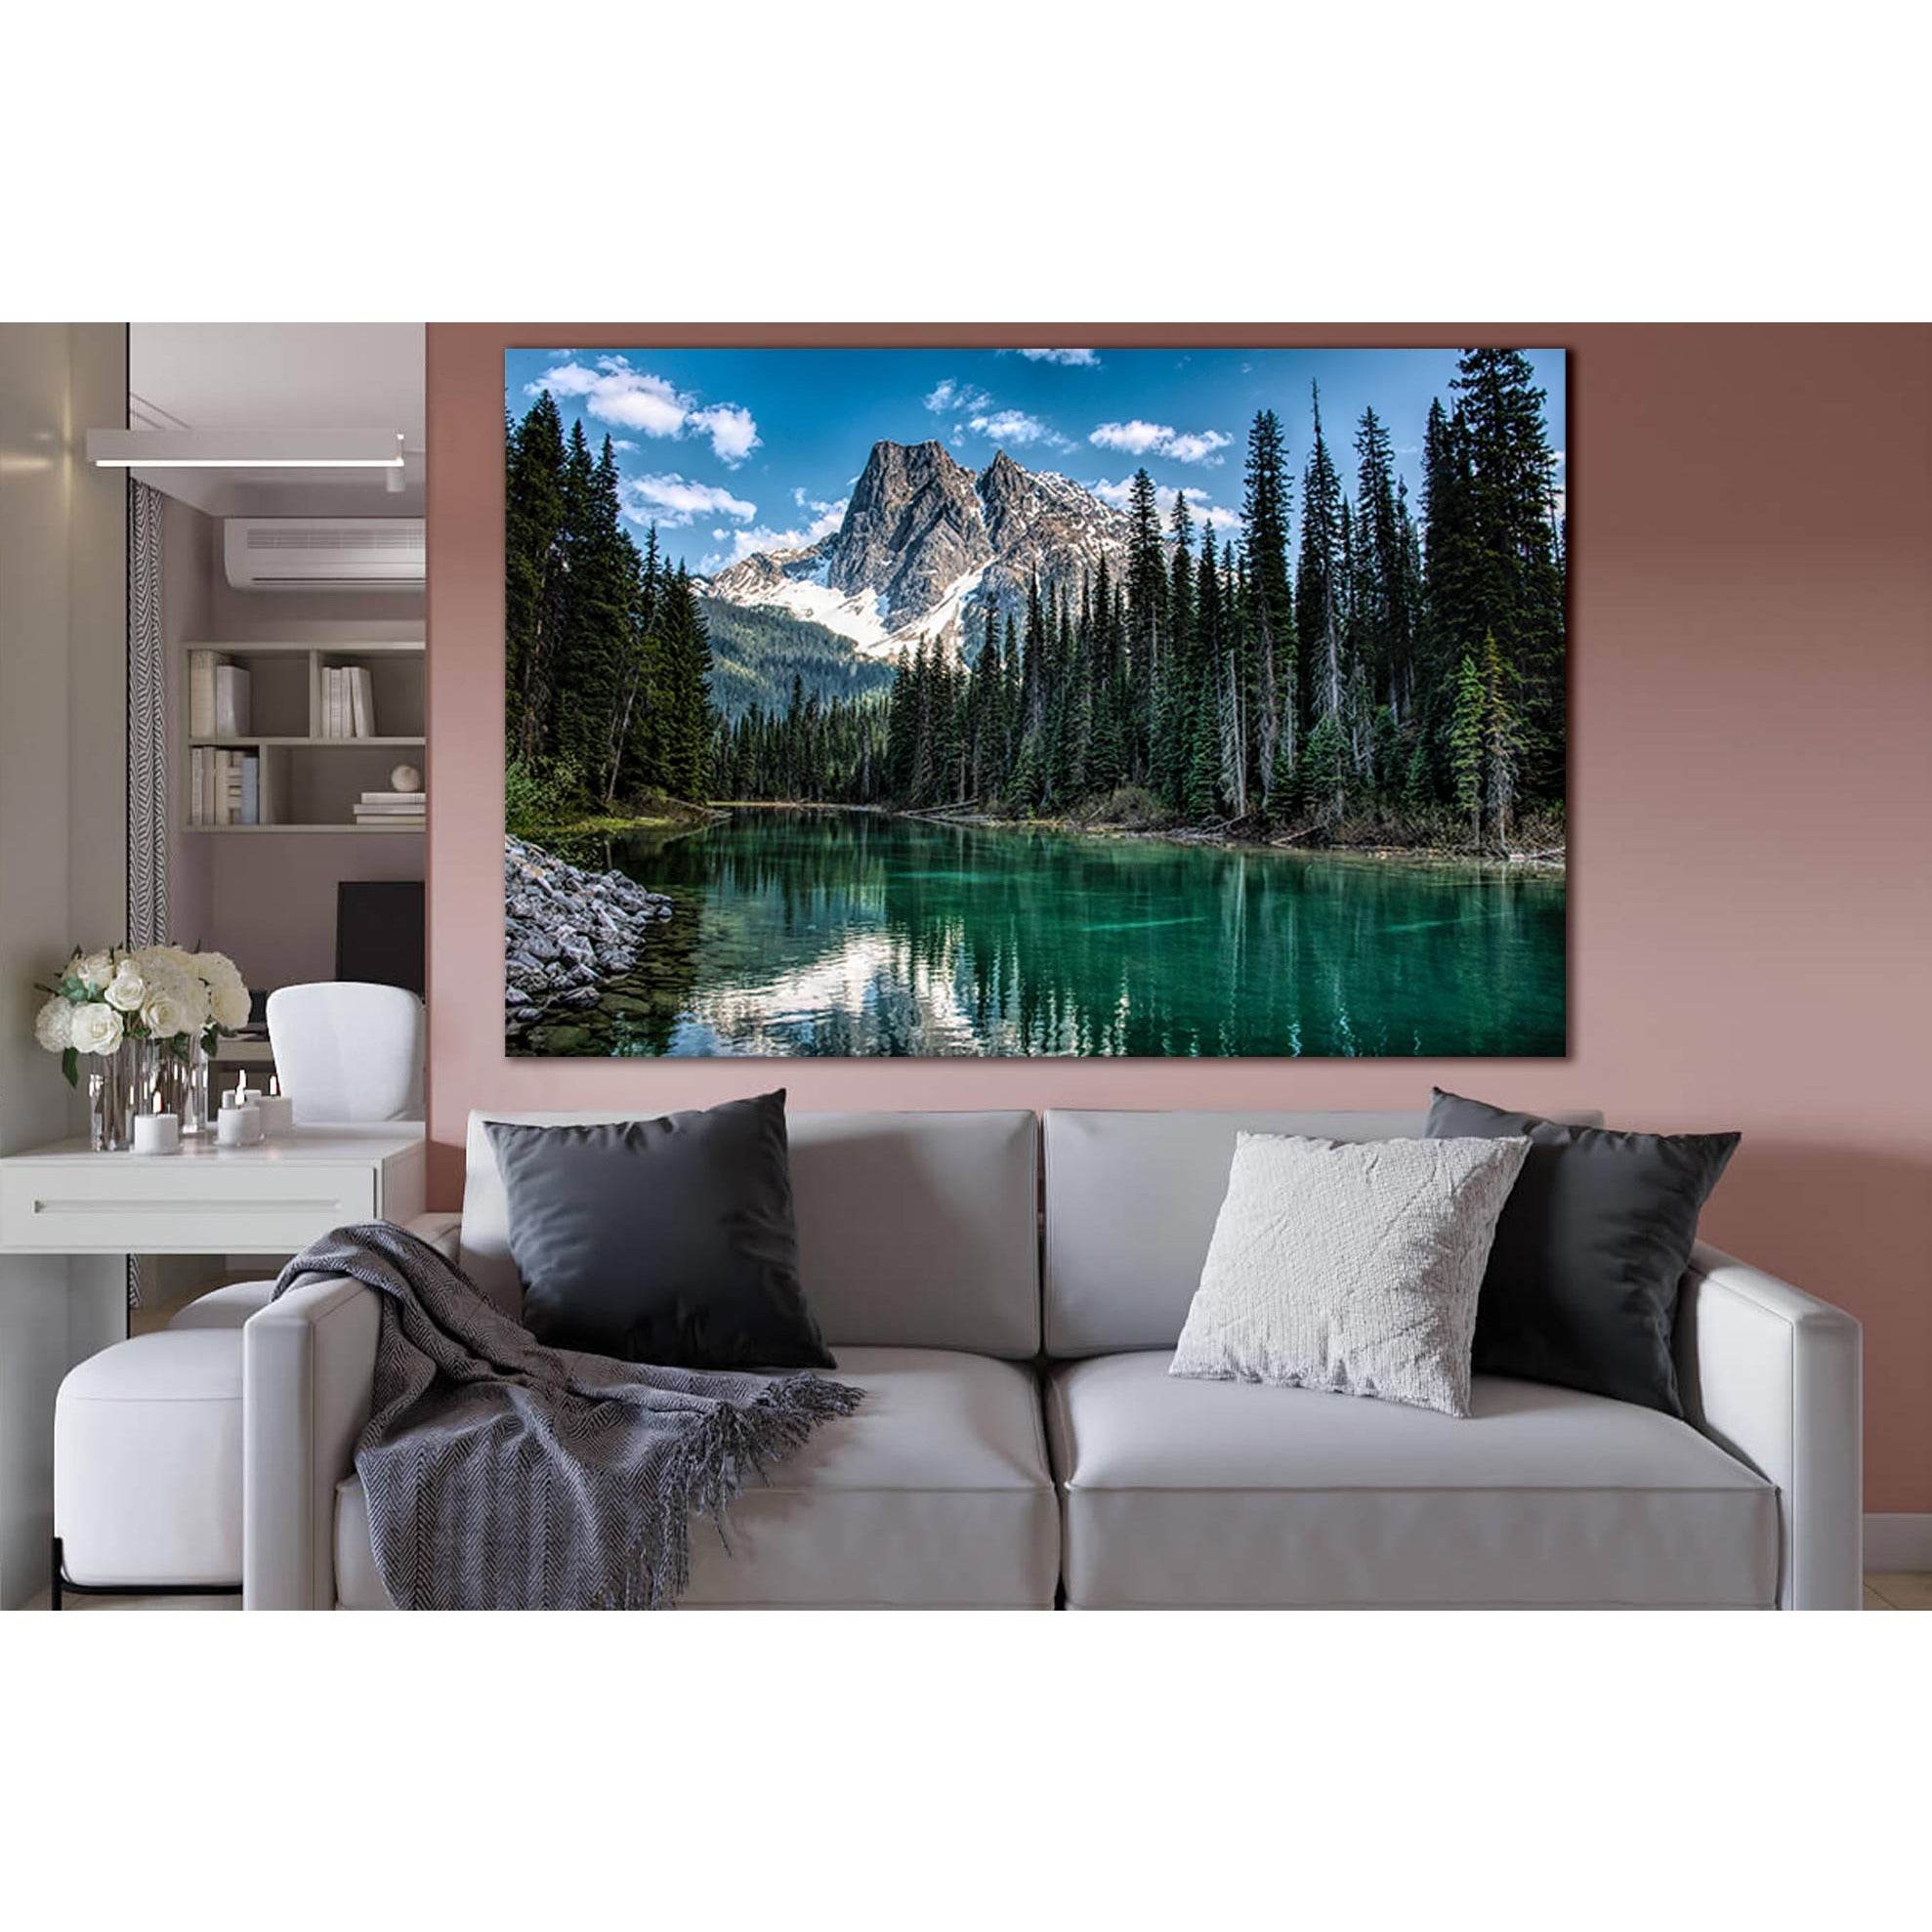 River In Mountain Forest №SL1596 Ready to Hang Canvas Print